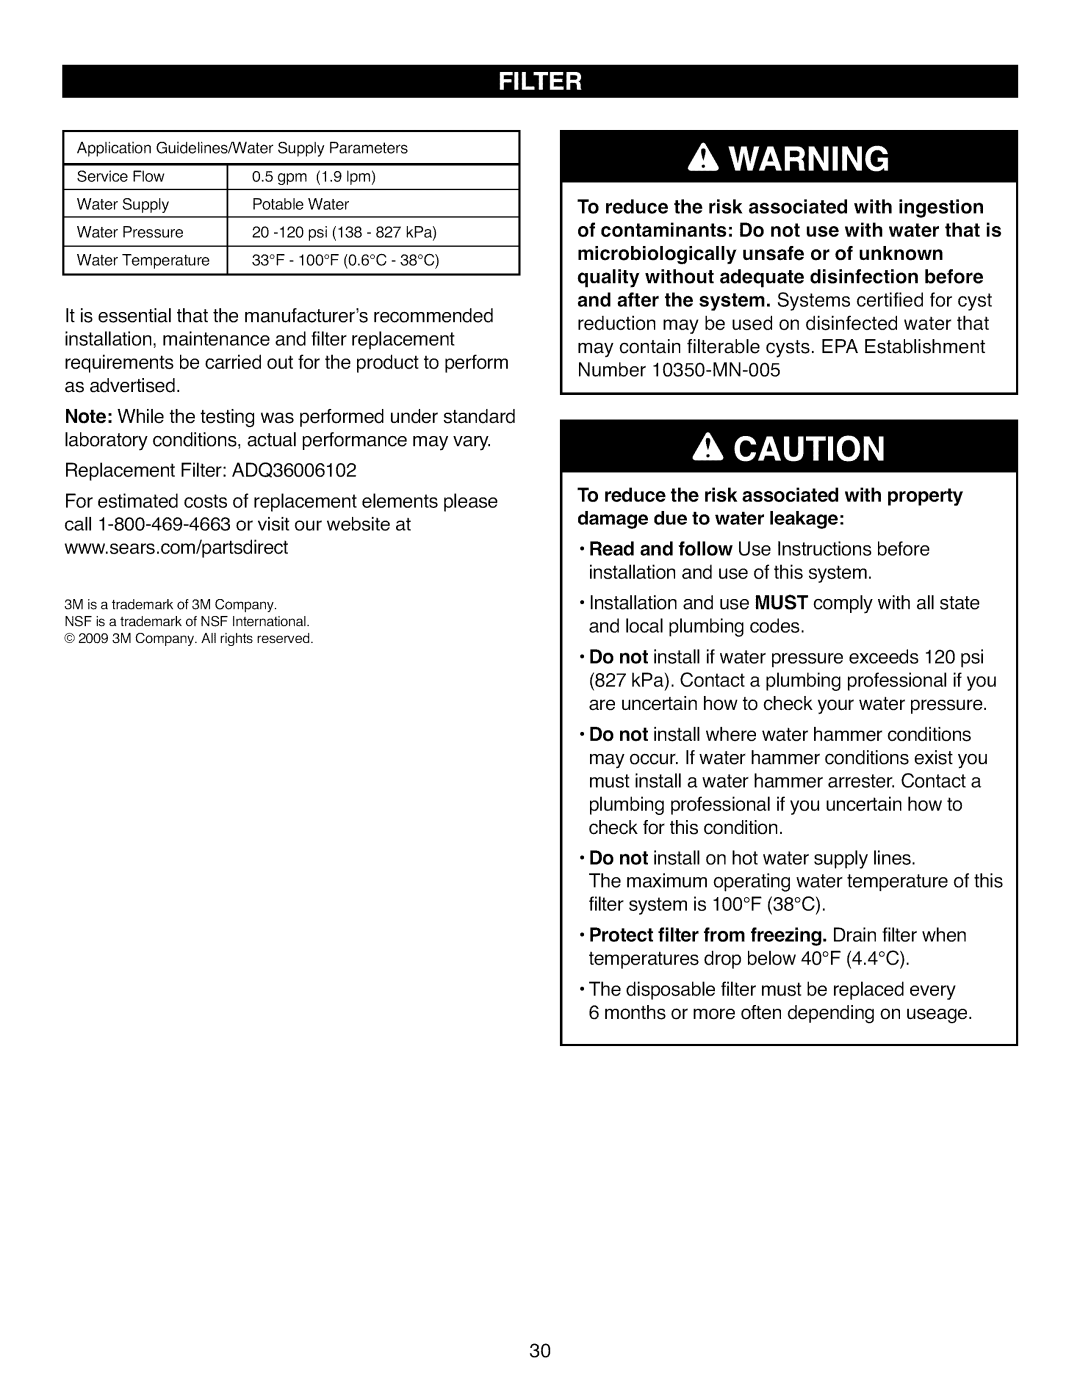 Kenmore 795.7105 manual To reduce the risk associated with ingestion, of contaminants: Do not use with water that is 